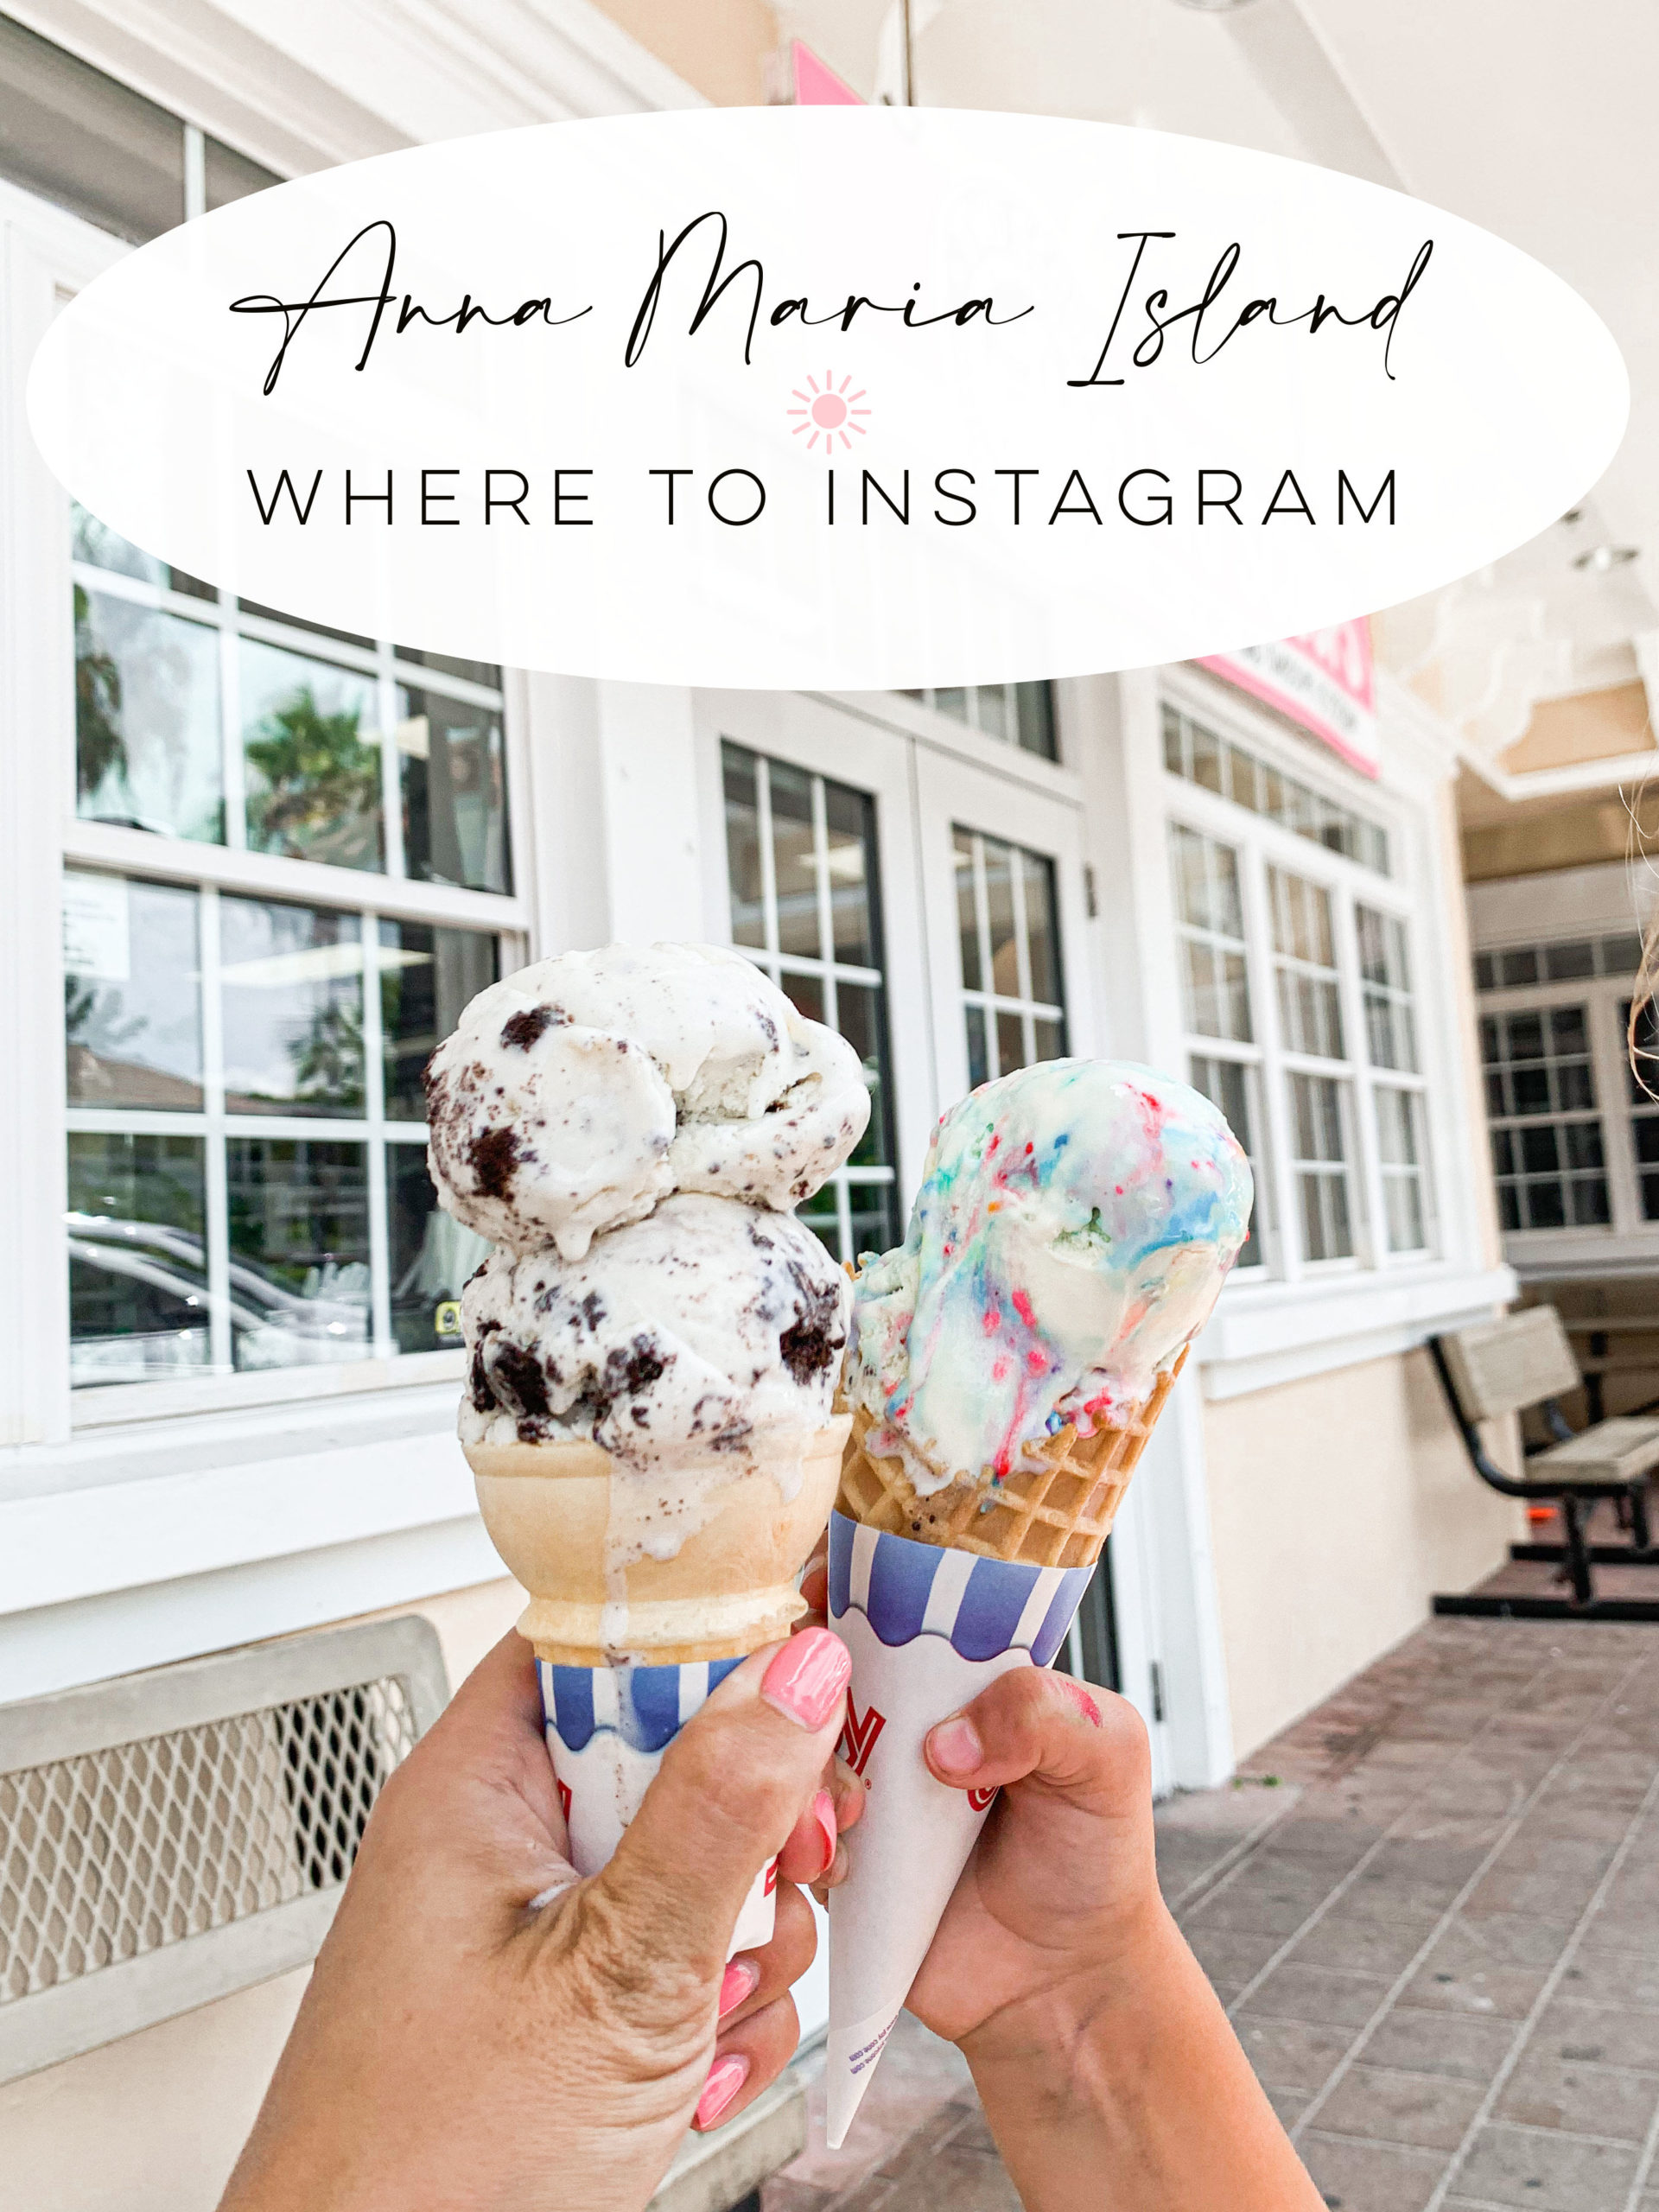 10 Most Instagrammable Spots on Anna Maria Island